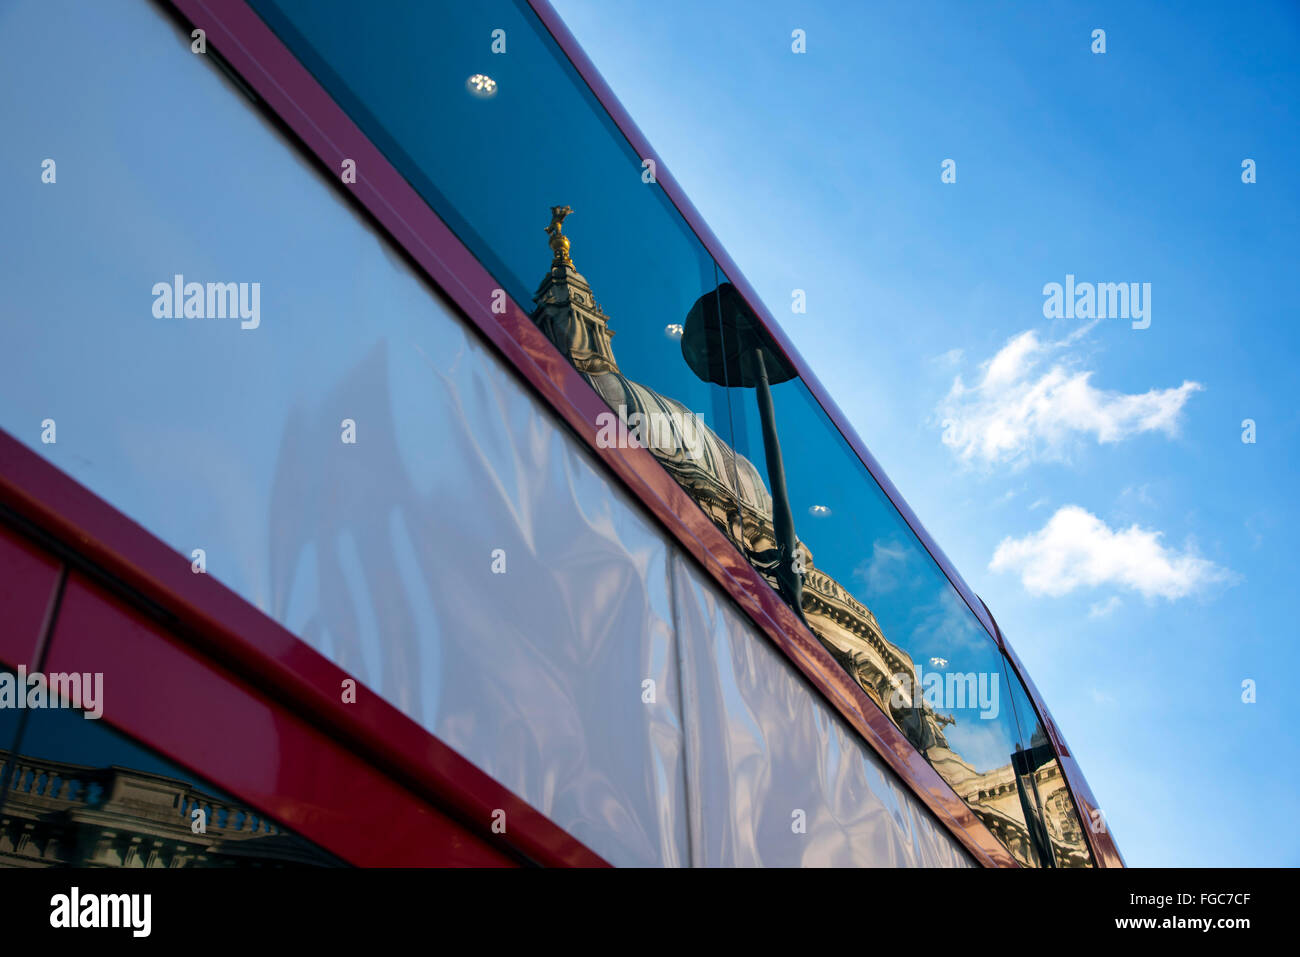 St Paul's Cathedral dome reflection bus side red Stock Photo